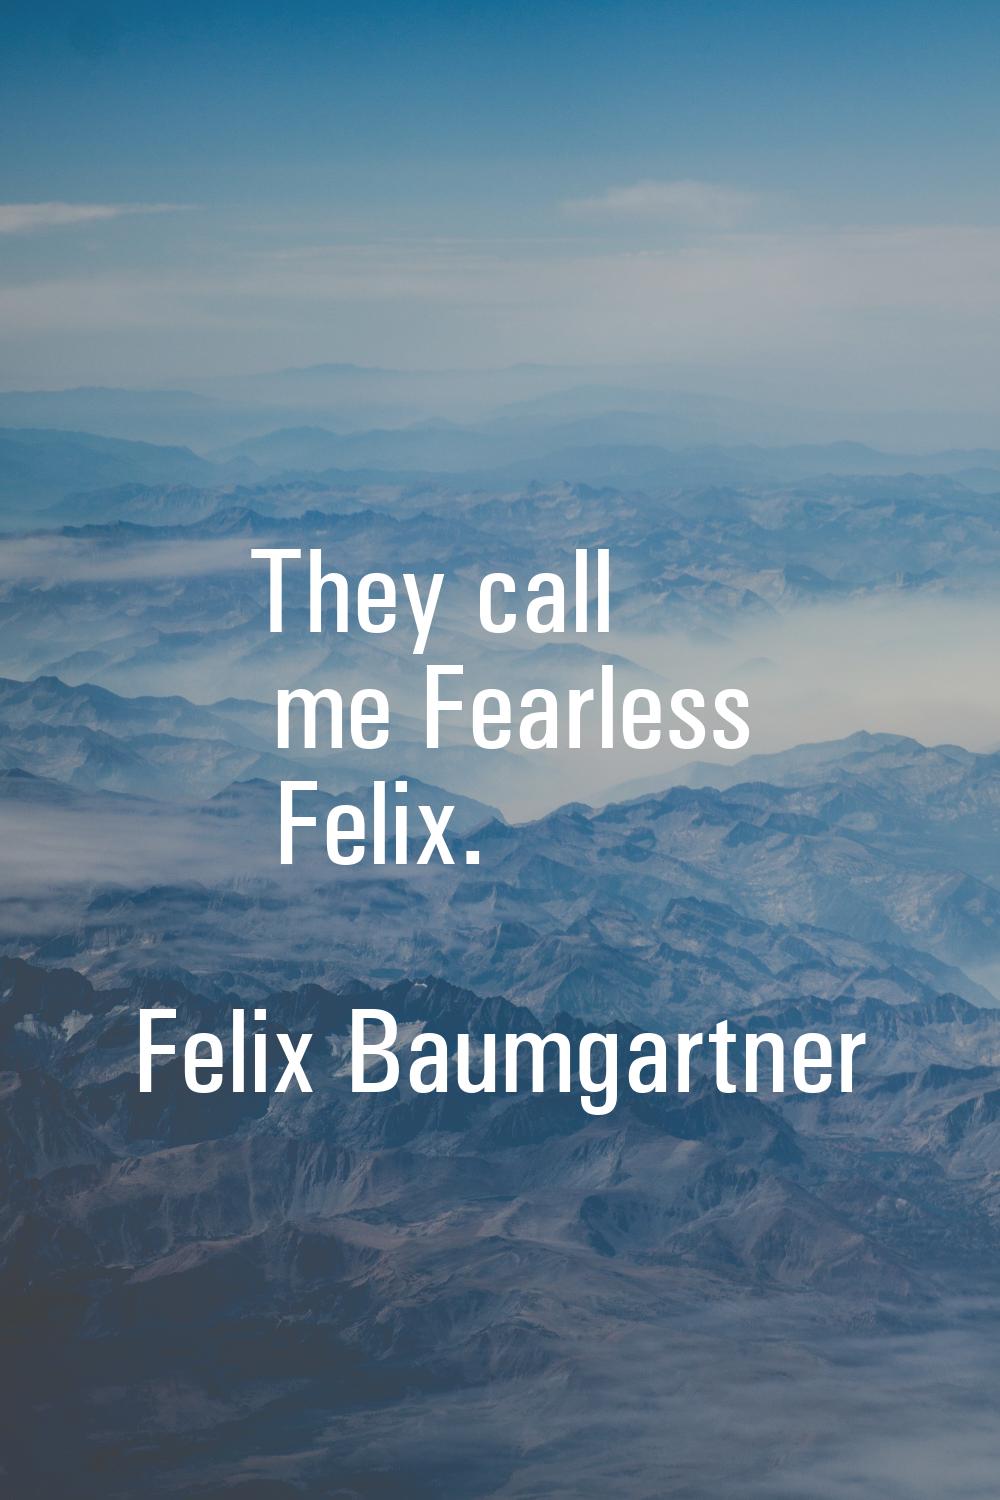 They call me Fearless Felix.